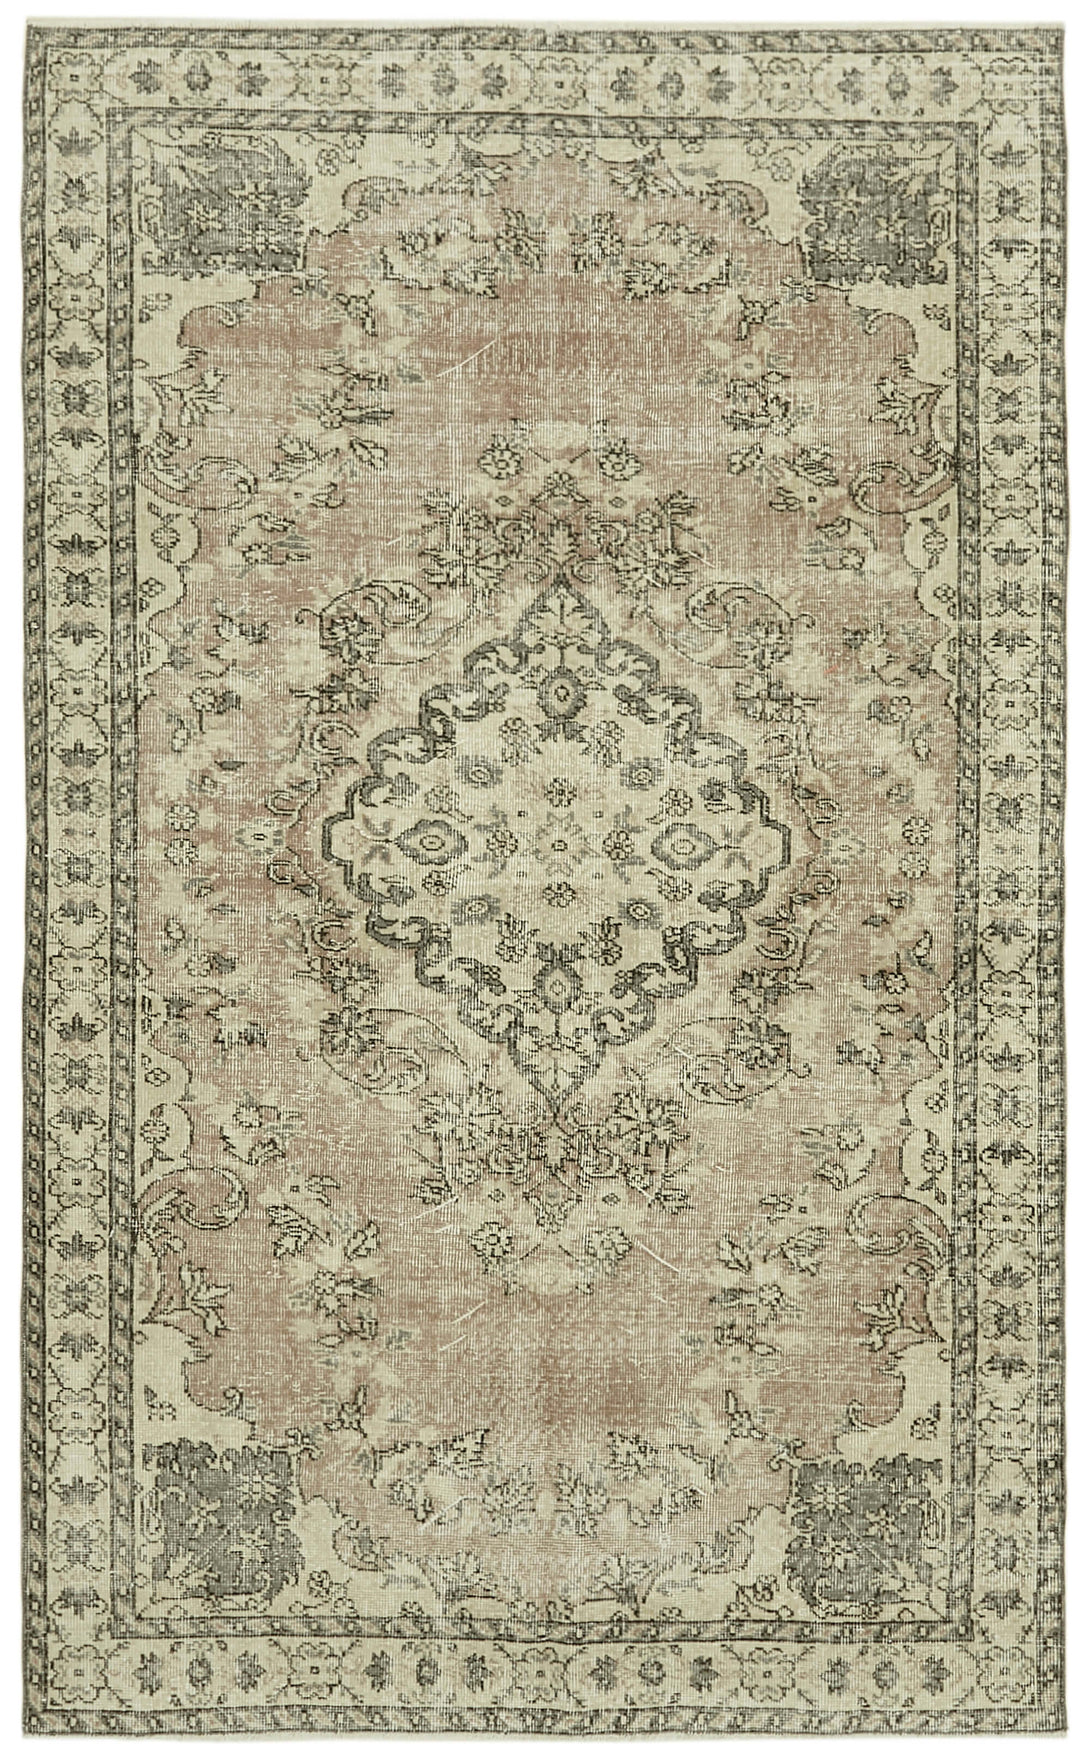 Handmade White Wash Area Rug > Design# OL-AC-41834 > Size: 5'-2" x 8'-5", Carpet Culture Rugs, Handmade Rugs, NYC Rugs, New Rugs, Shop Rugs, Rug Store, Outlet Rugs, SoHo Rugs, Rugs in USA